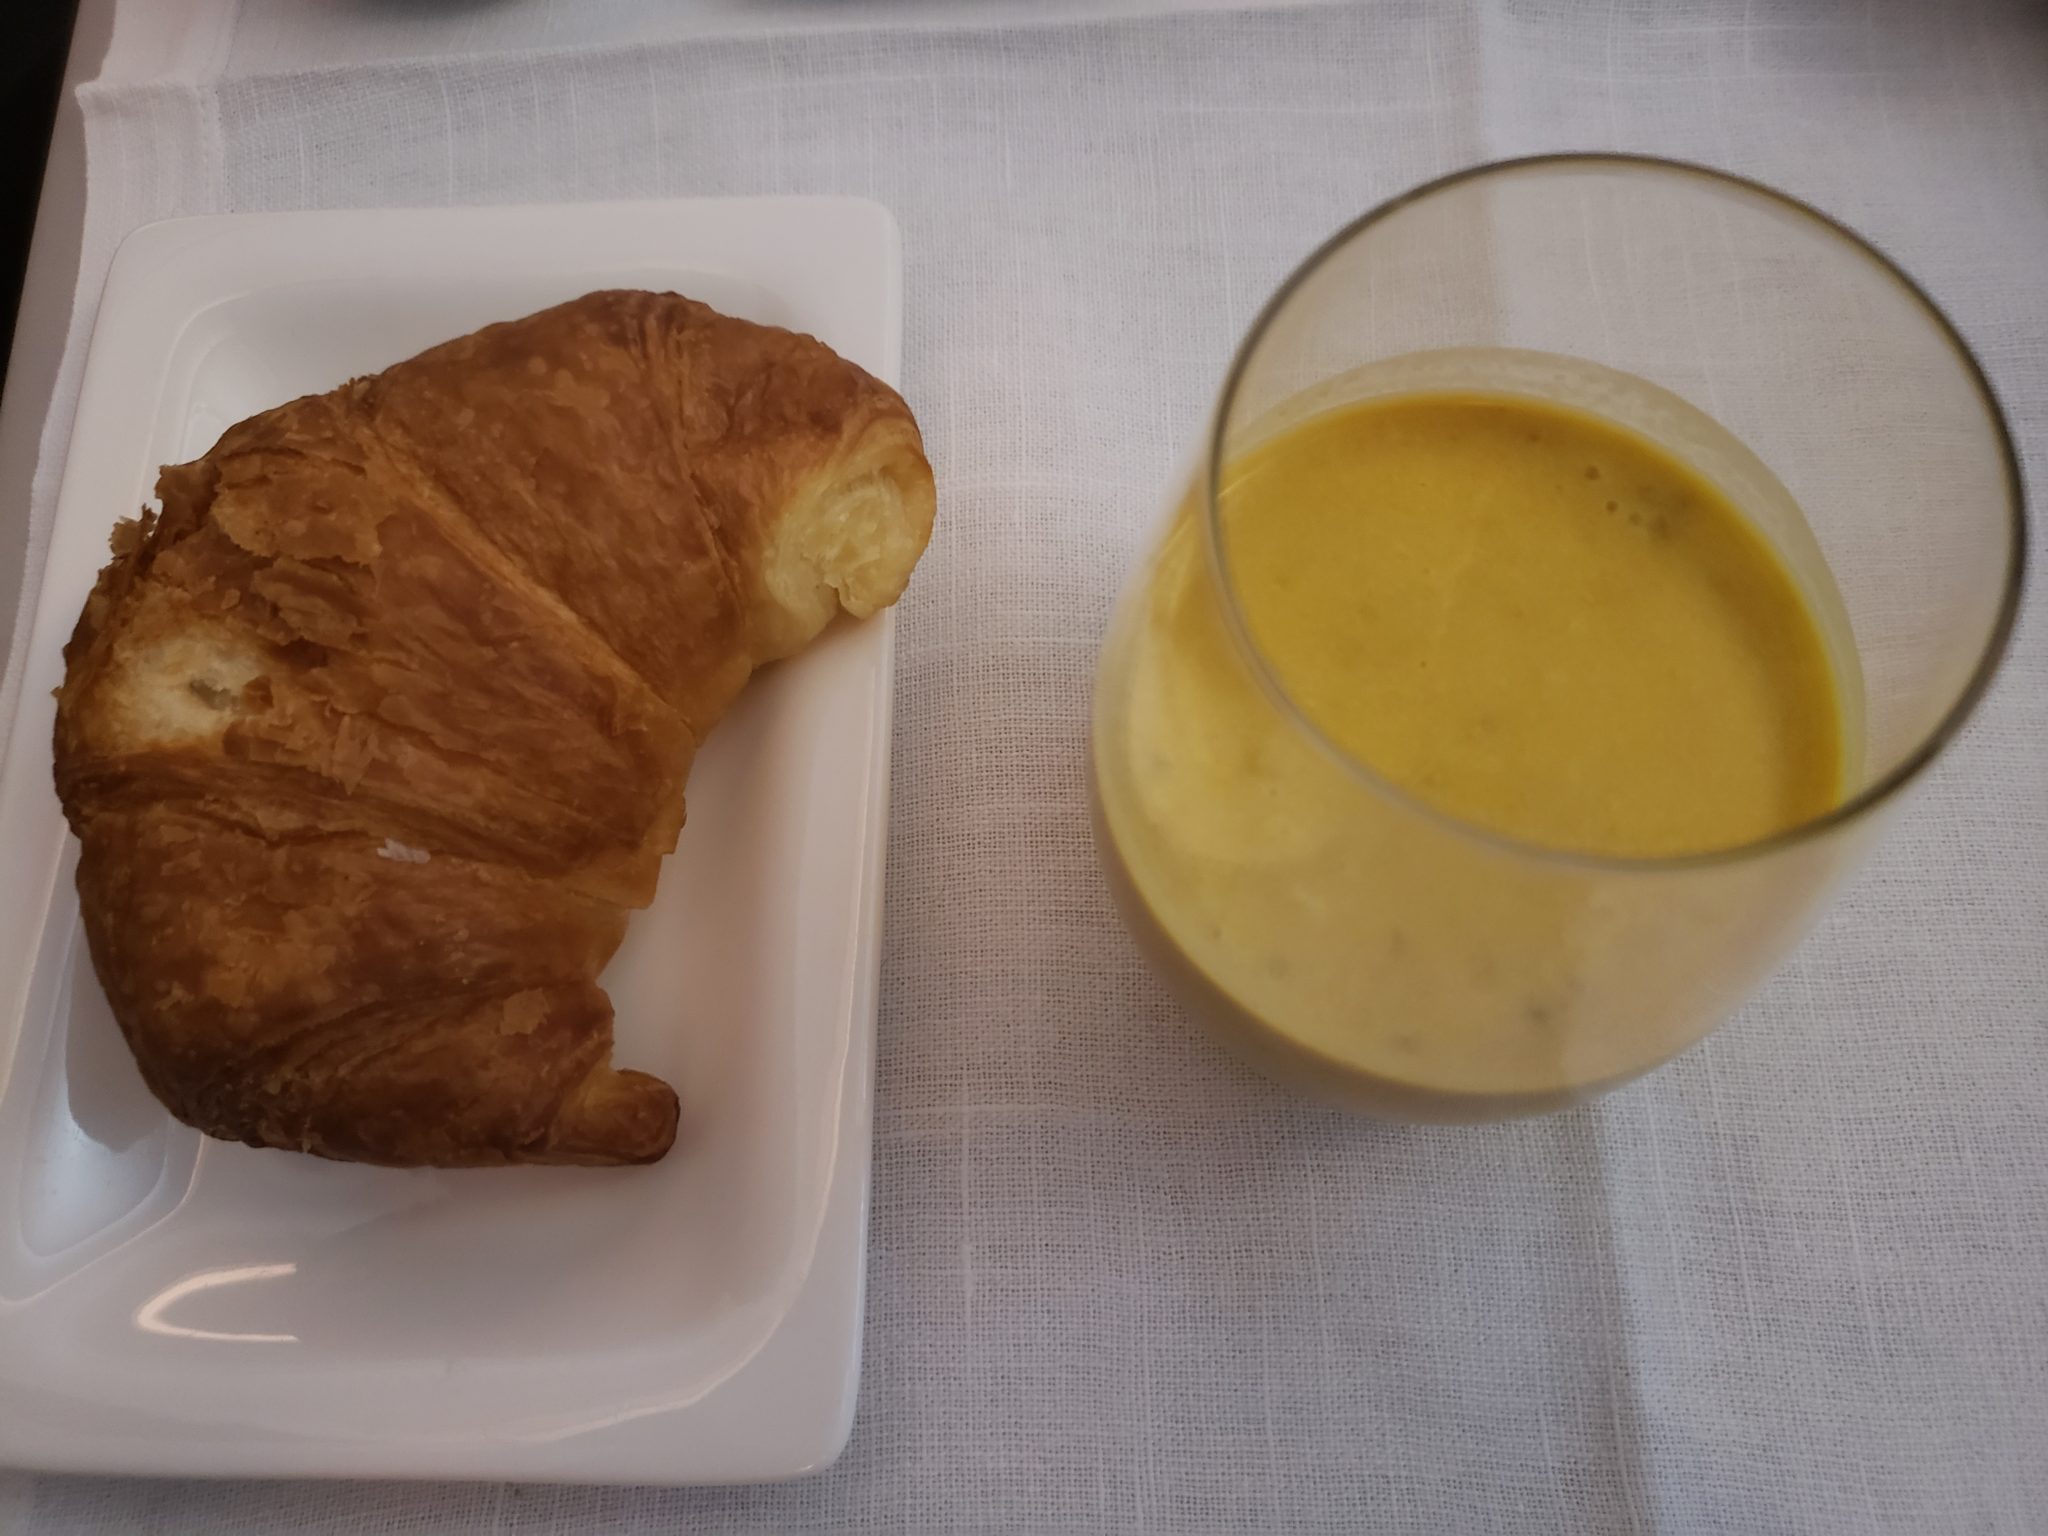 a croissant and a glass of liquid